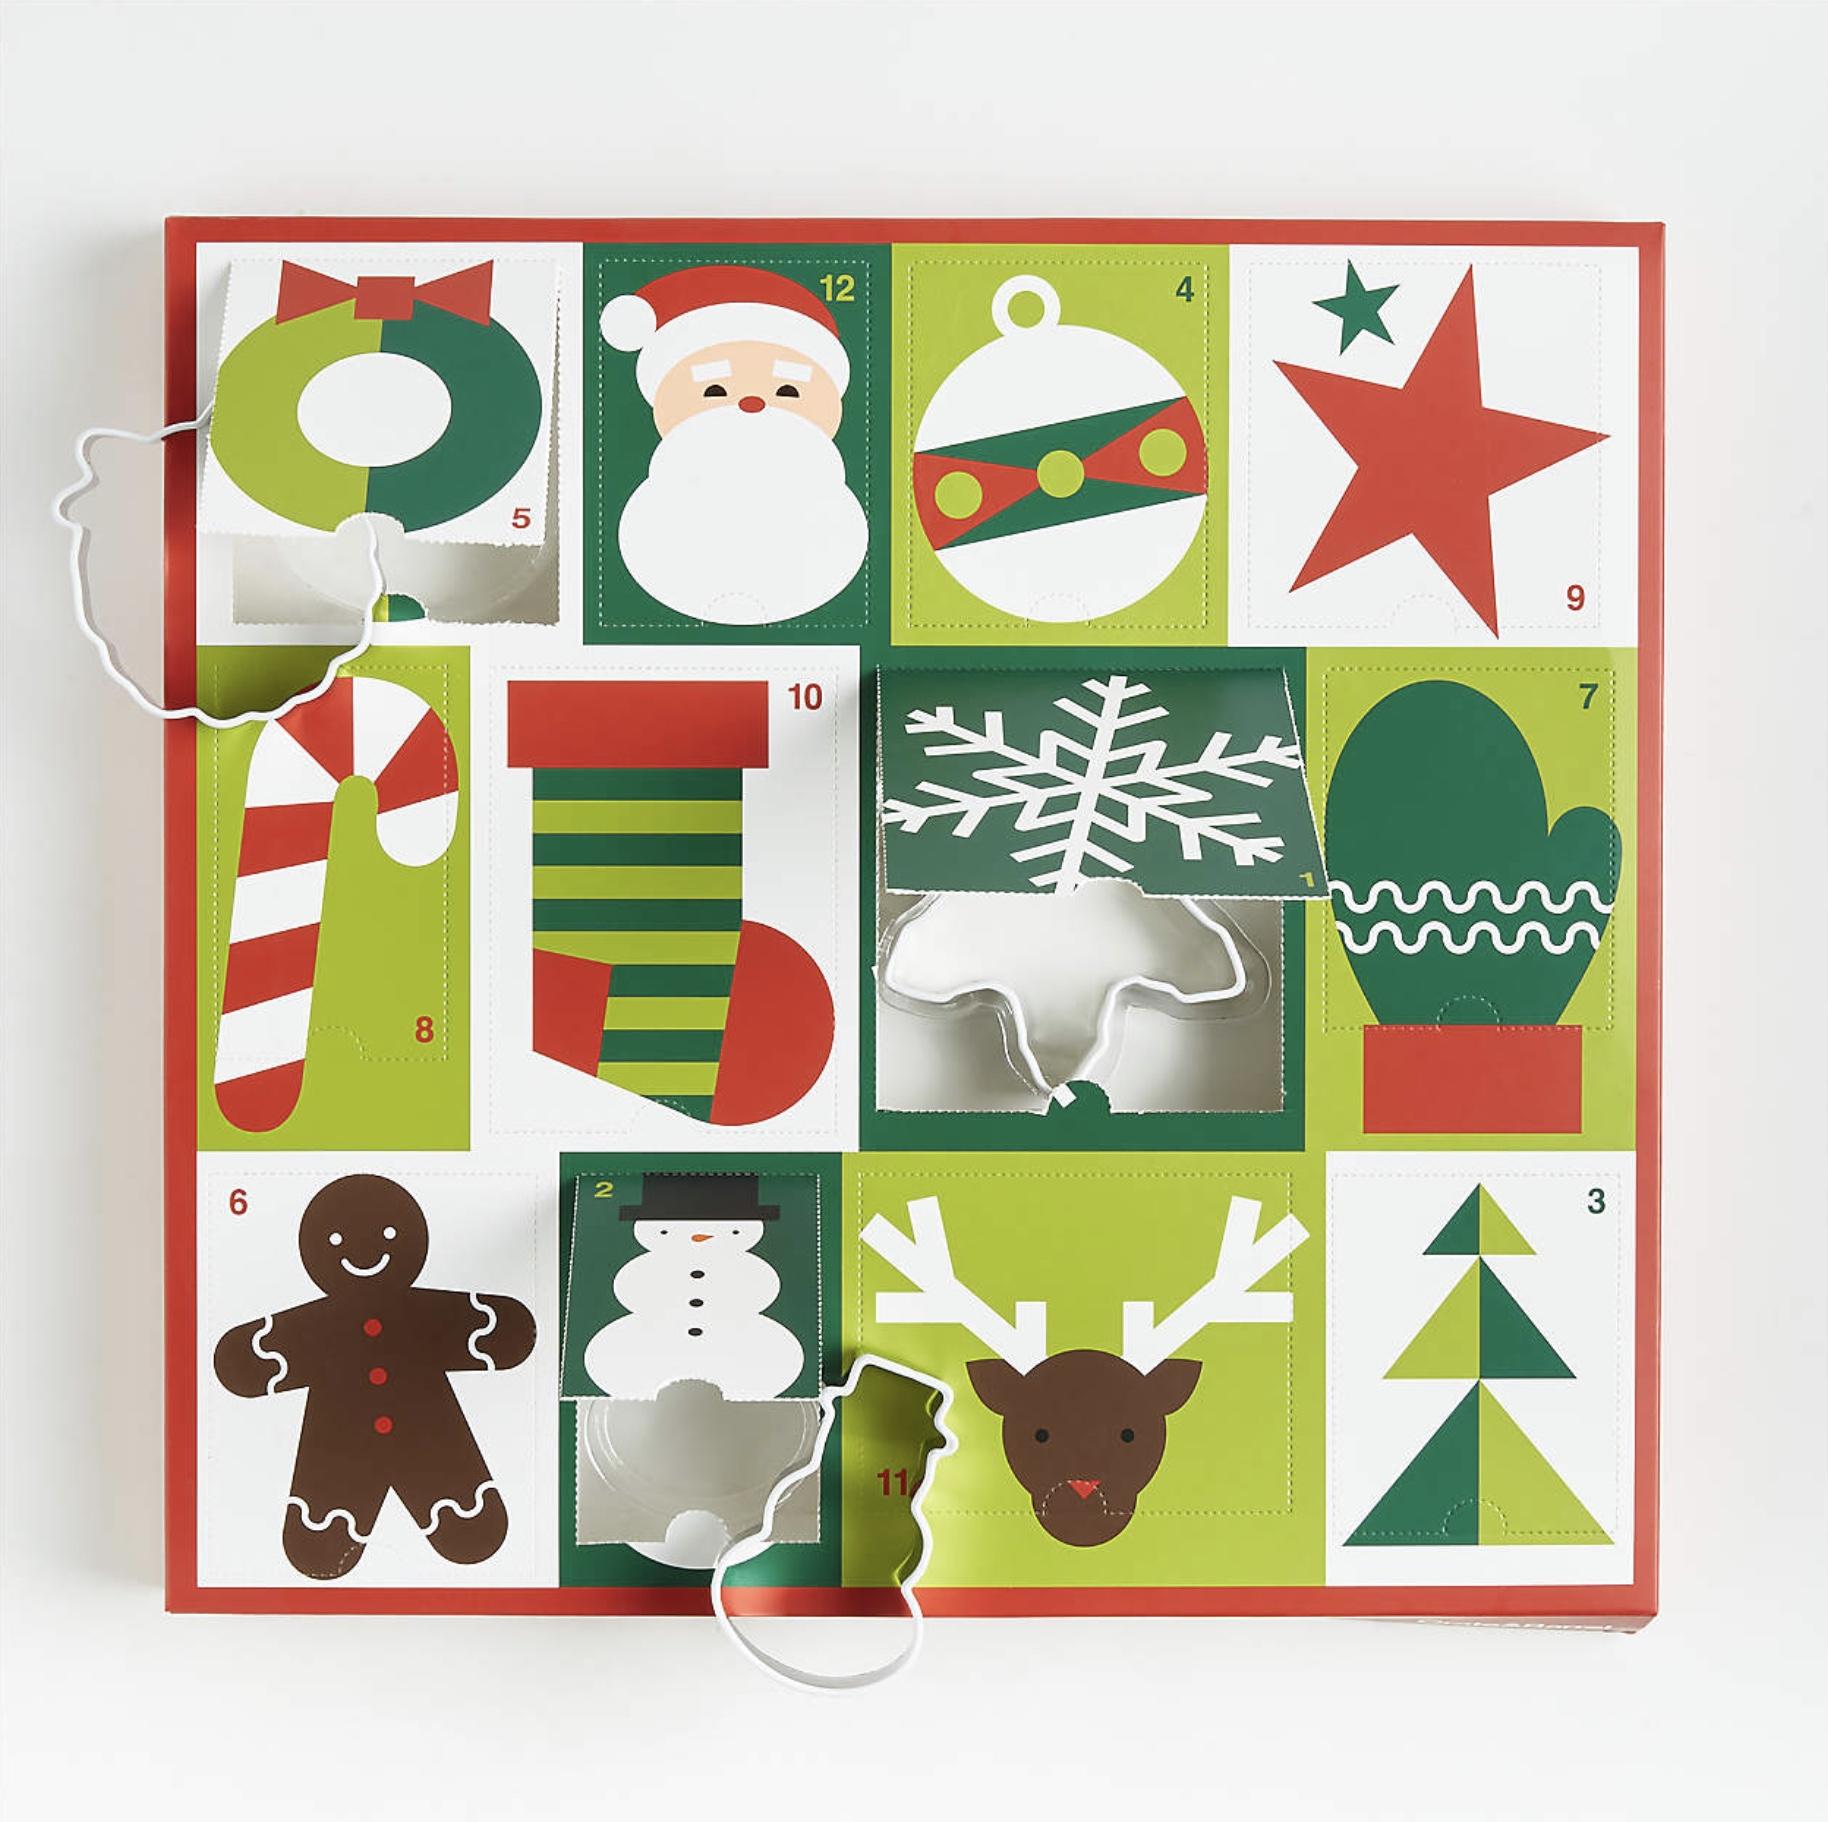 Crate and Barrel 12 Days of Christmas Cookie Cutter Advent Calendar – Now Available